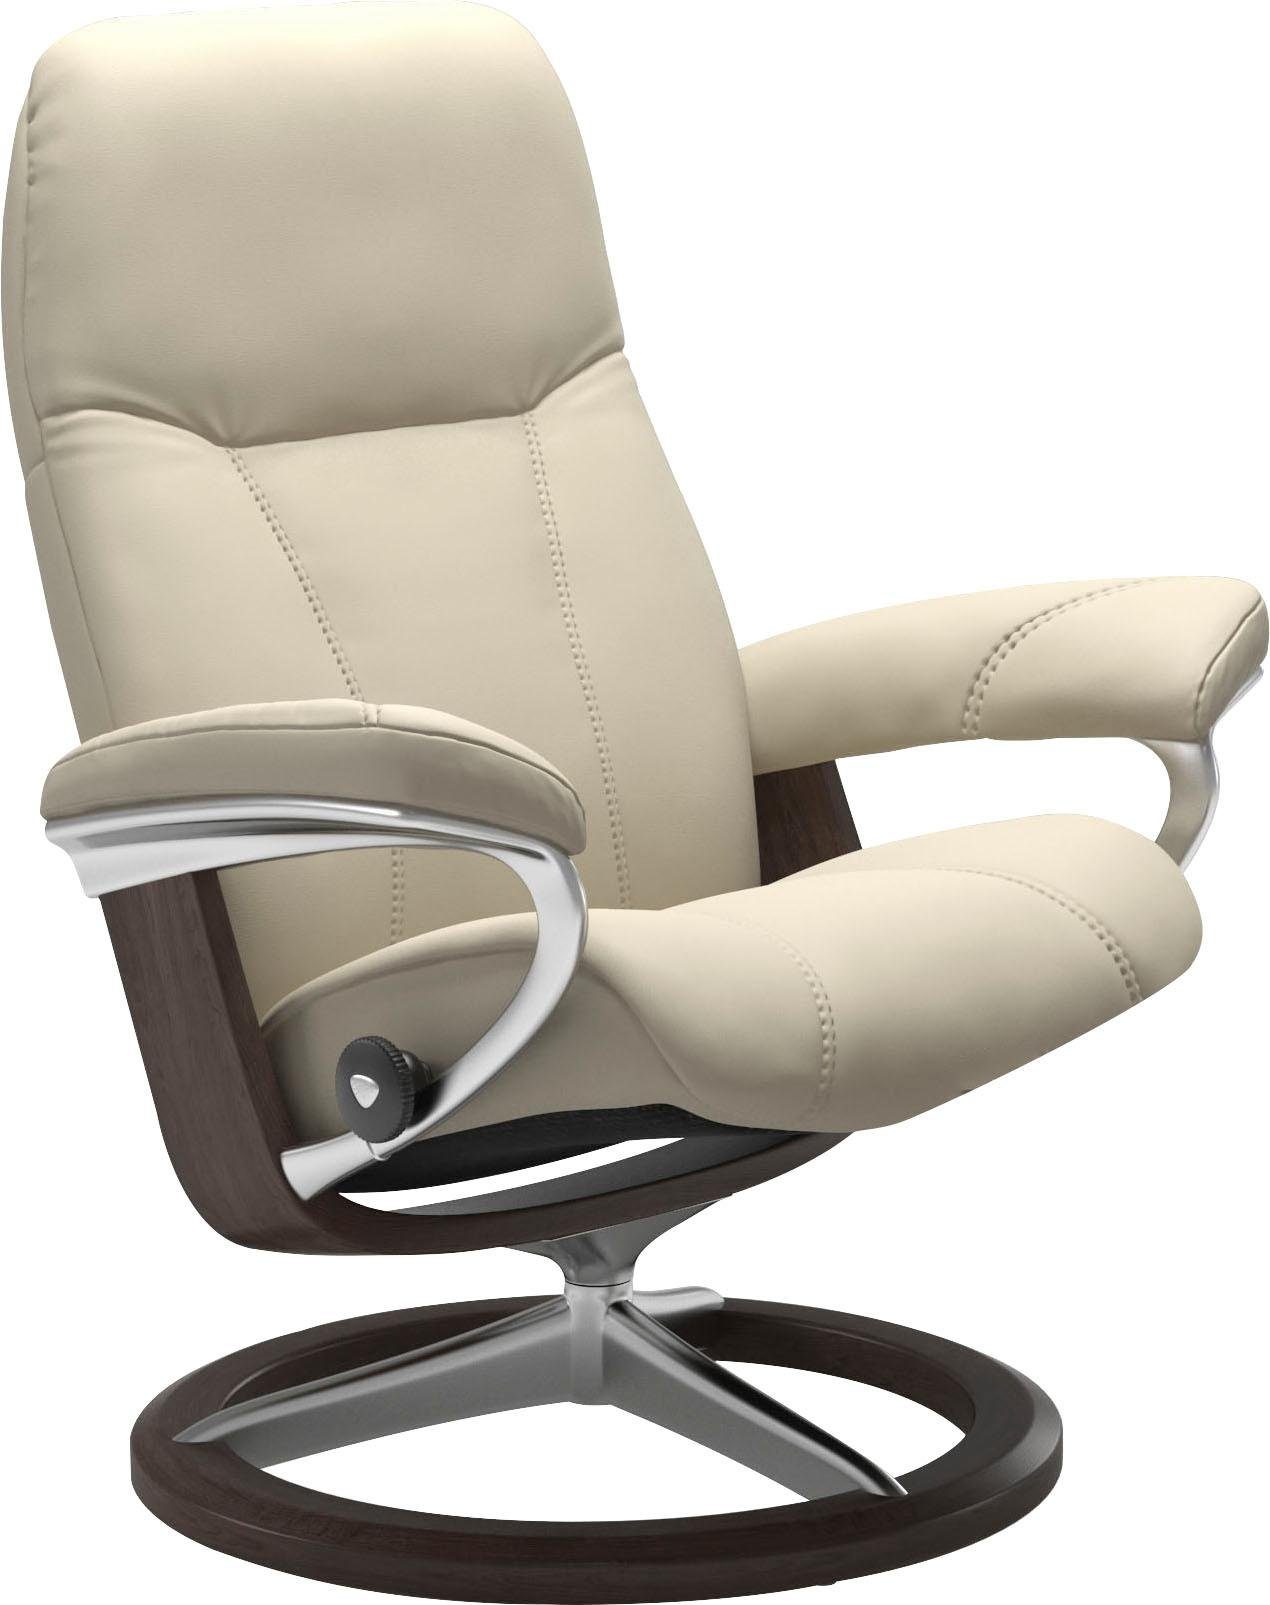 Wenge Gestell Consul, Stressless® Größe Relaxsessel S, mit Base, Signature